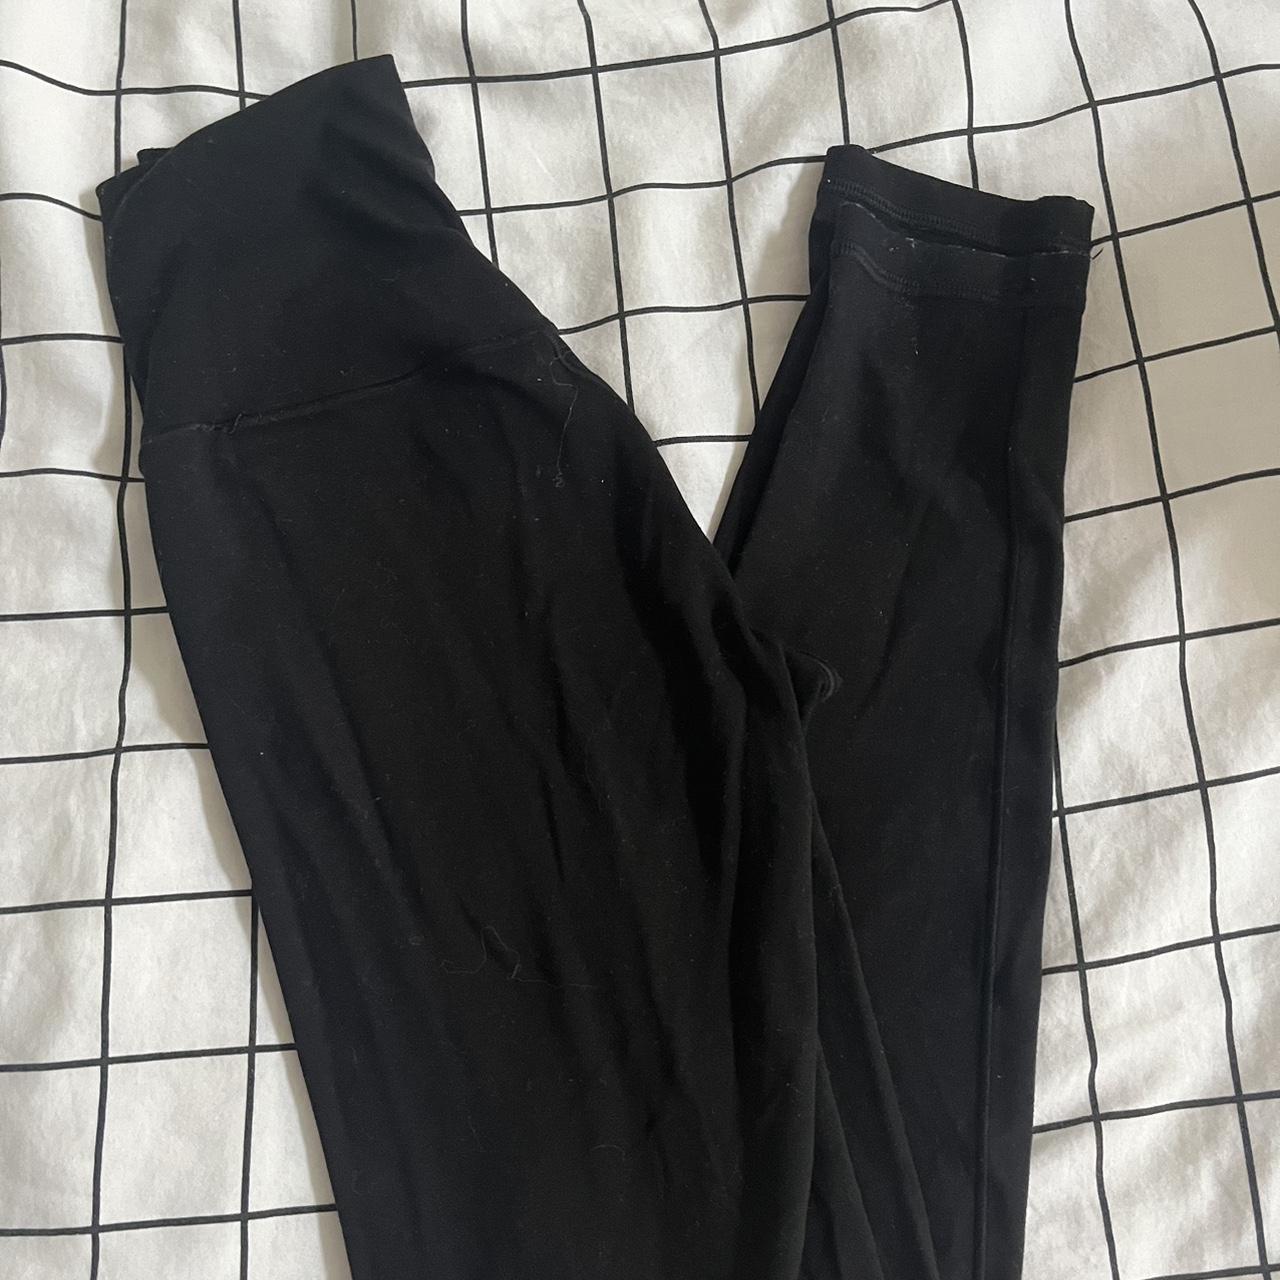 Black Aerie Leggings in size 2XS. Can fit an xs and - Depop